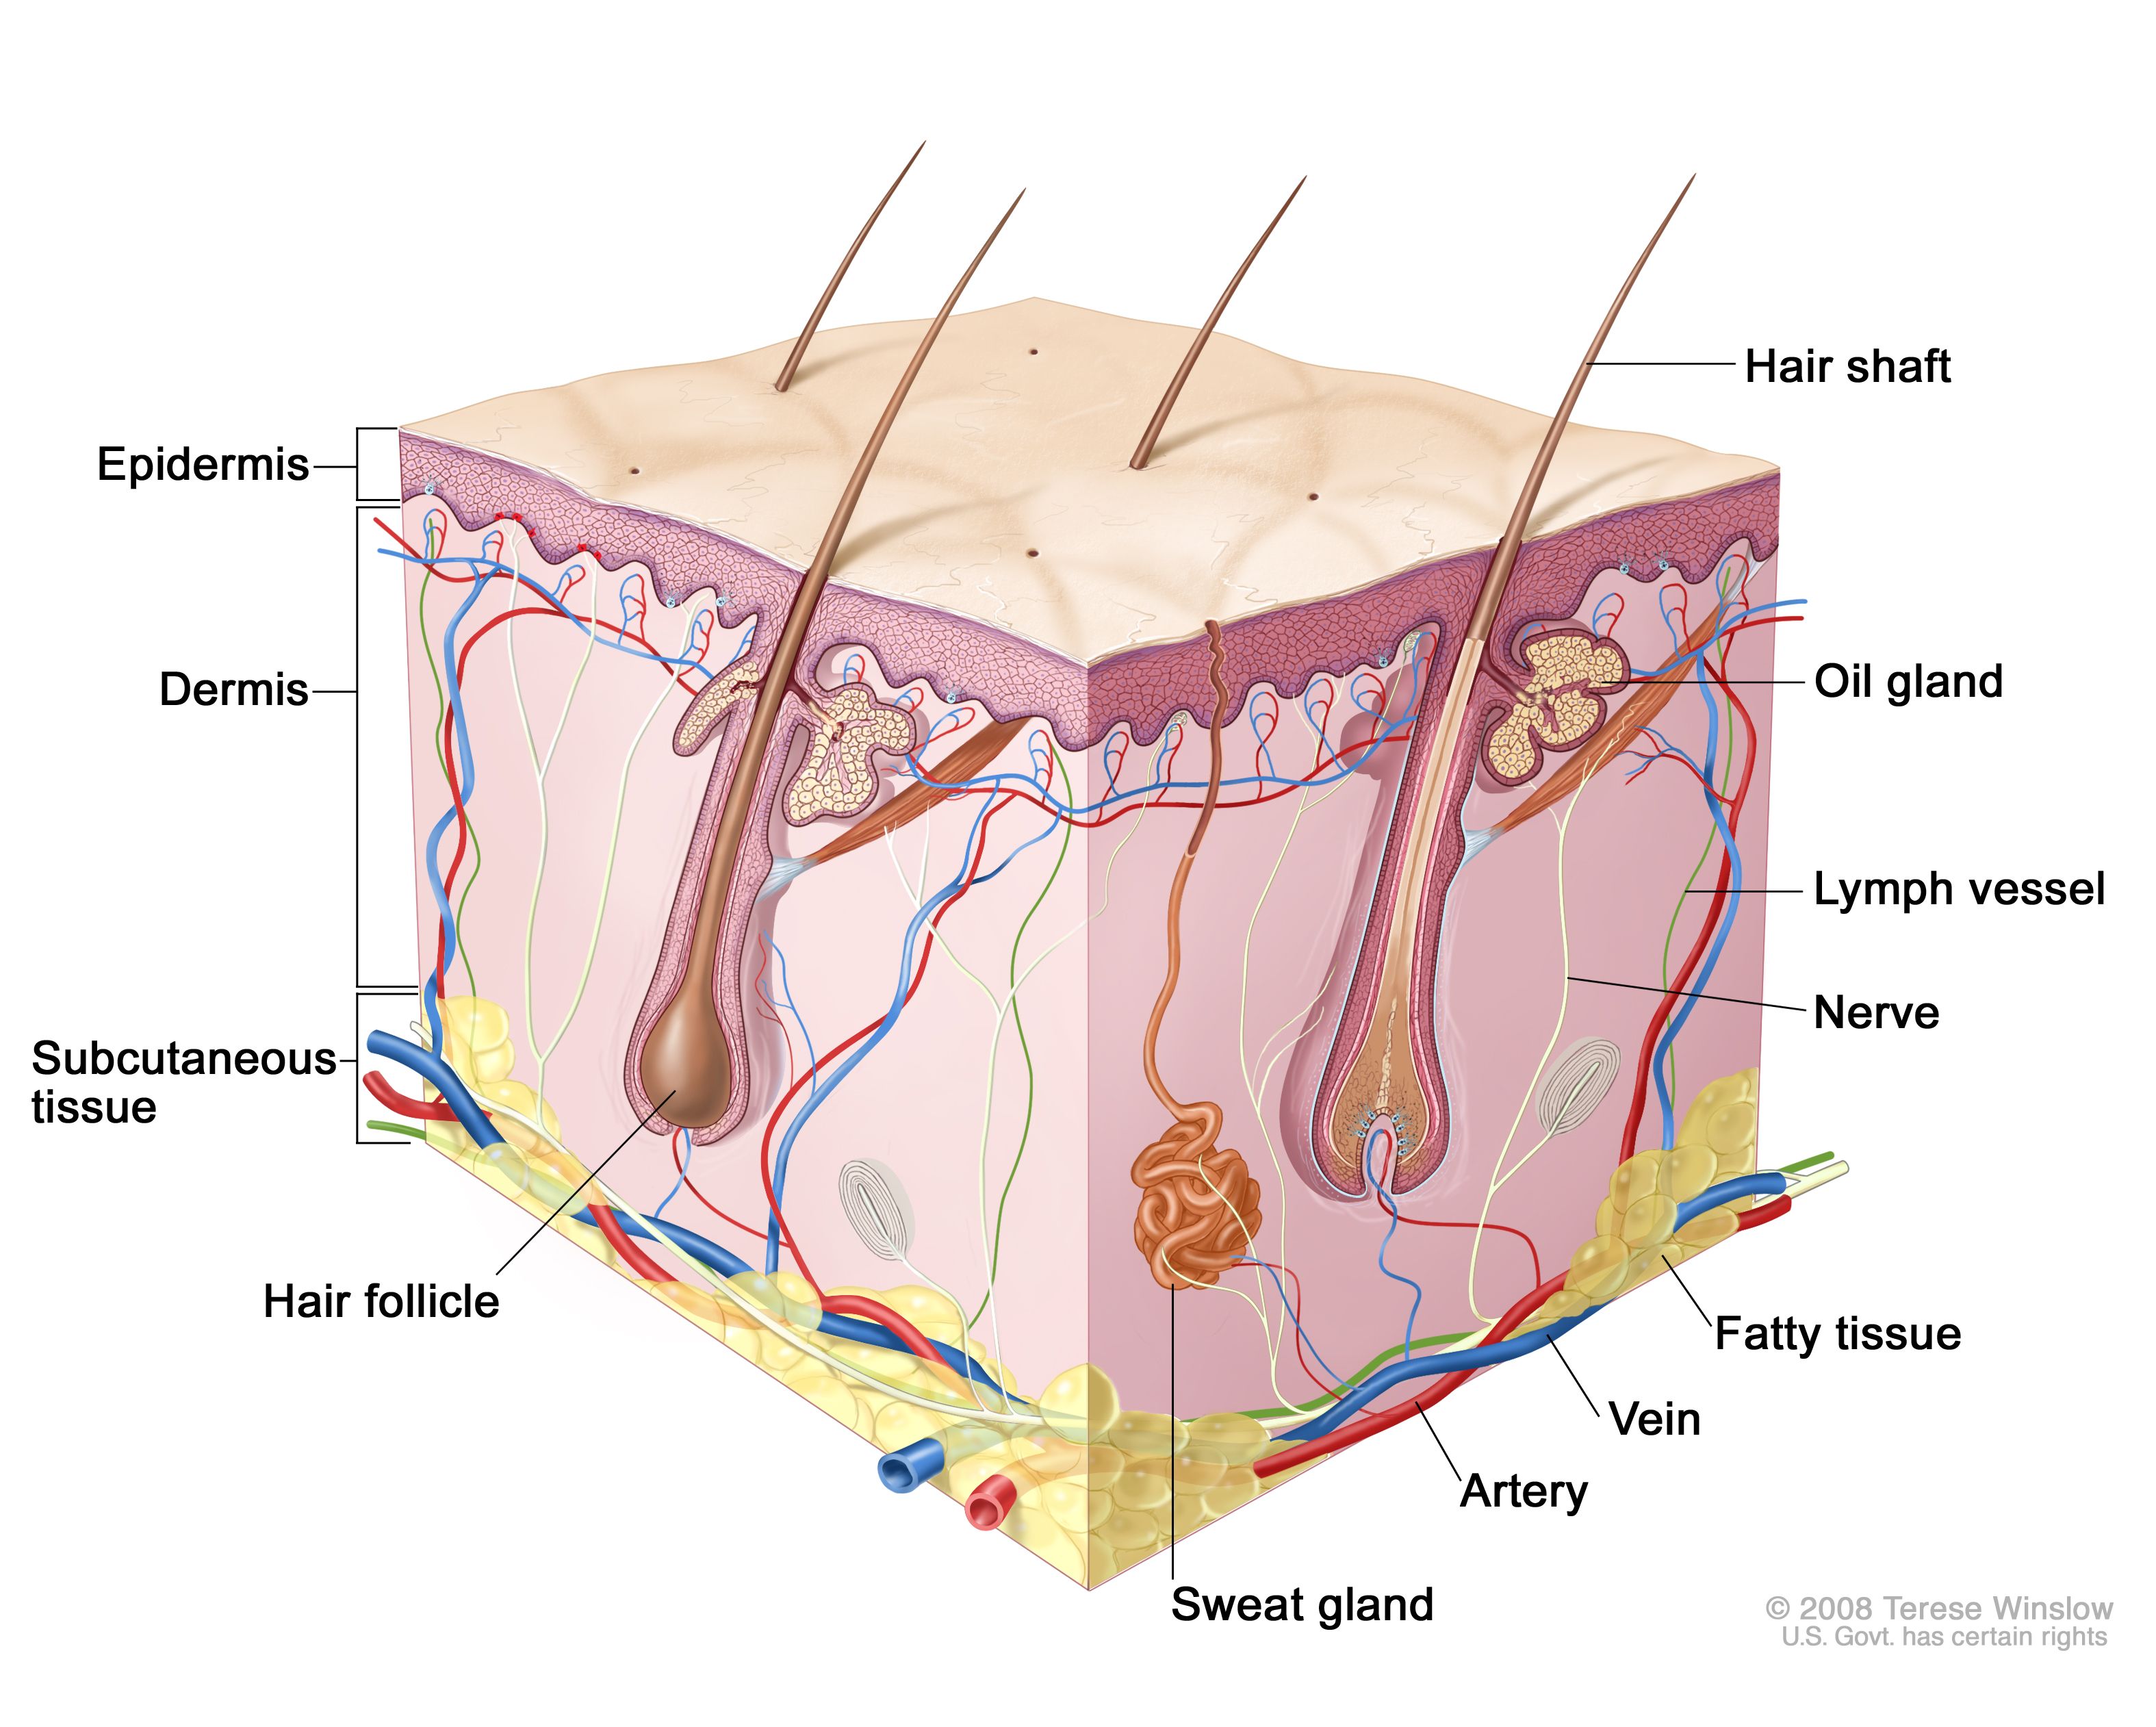 Definition of hair follicle - NCI Dictionary of Cancer Terms - NCI